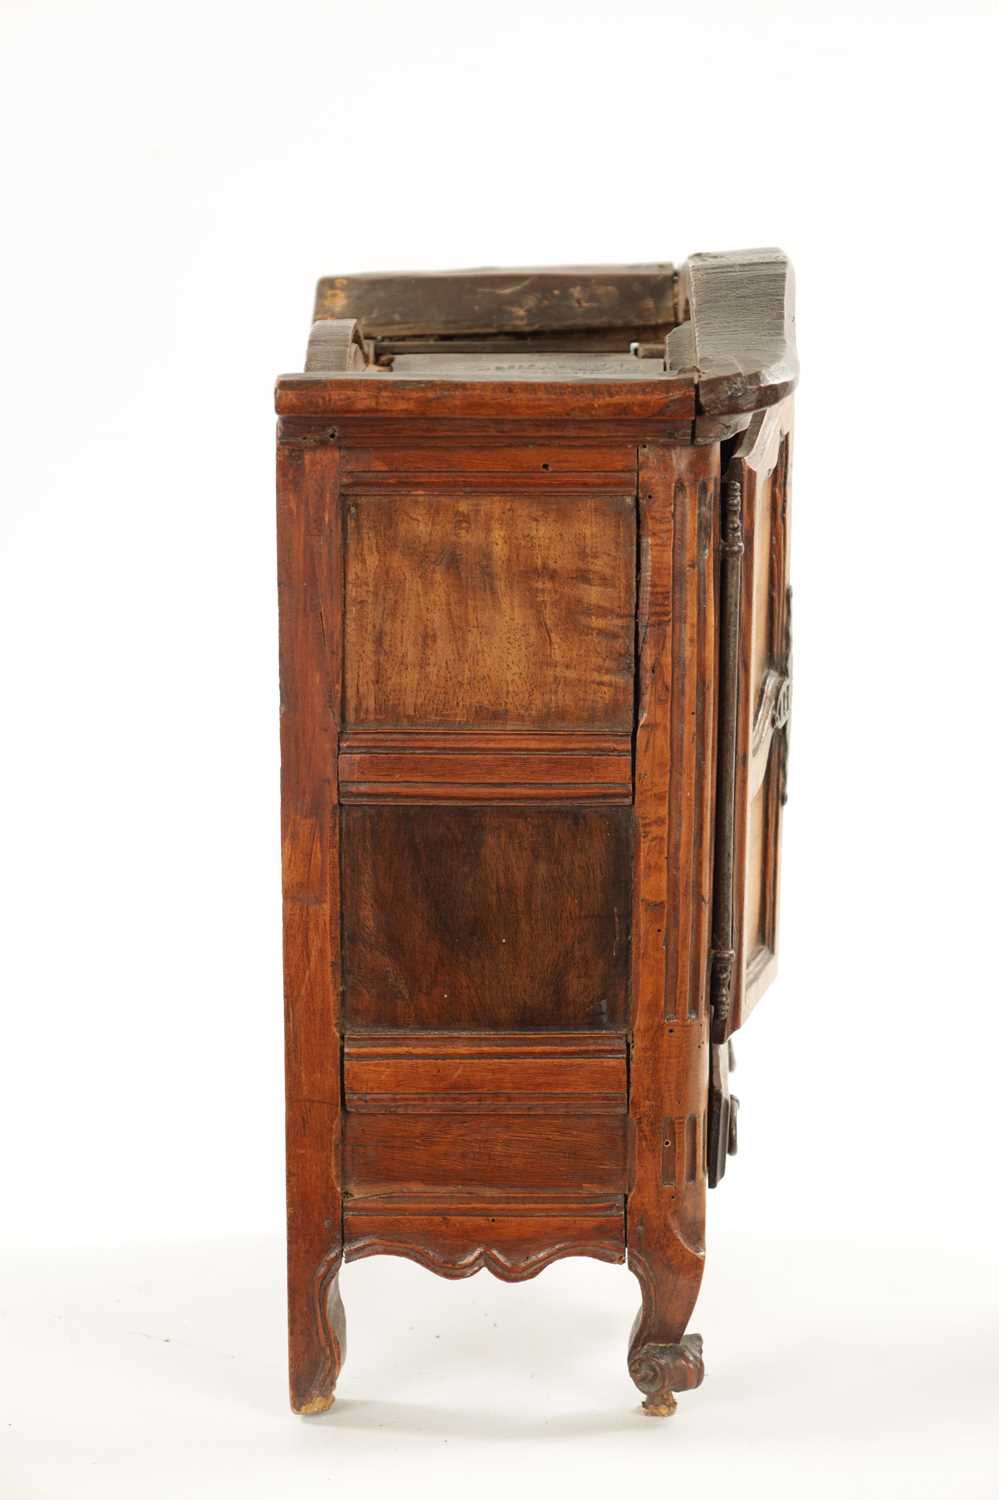 AN 18TH CENTURY FRUITWOOD MINIATURE ARMOIRE - Image 7 of 11